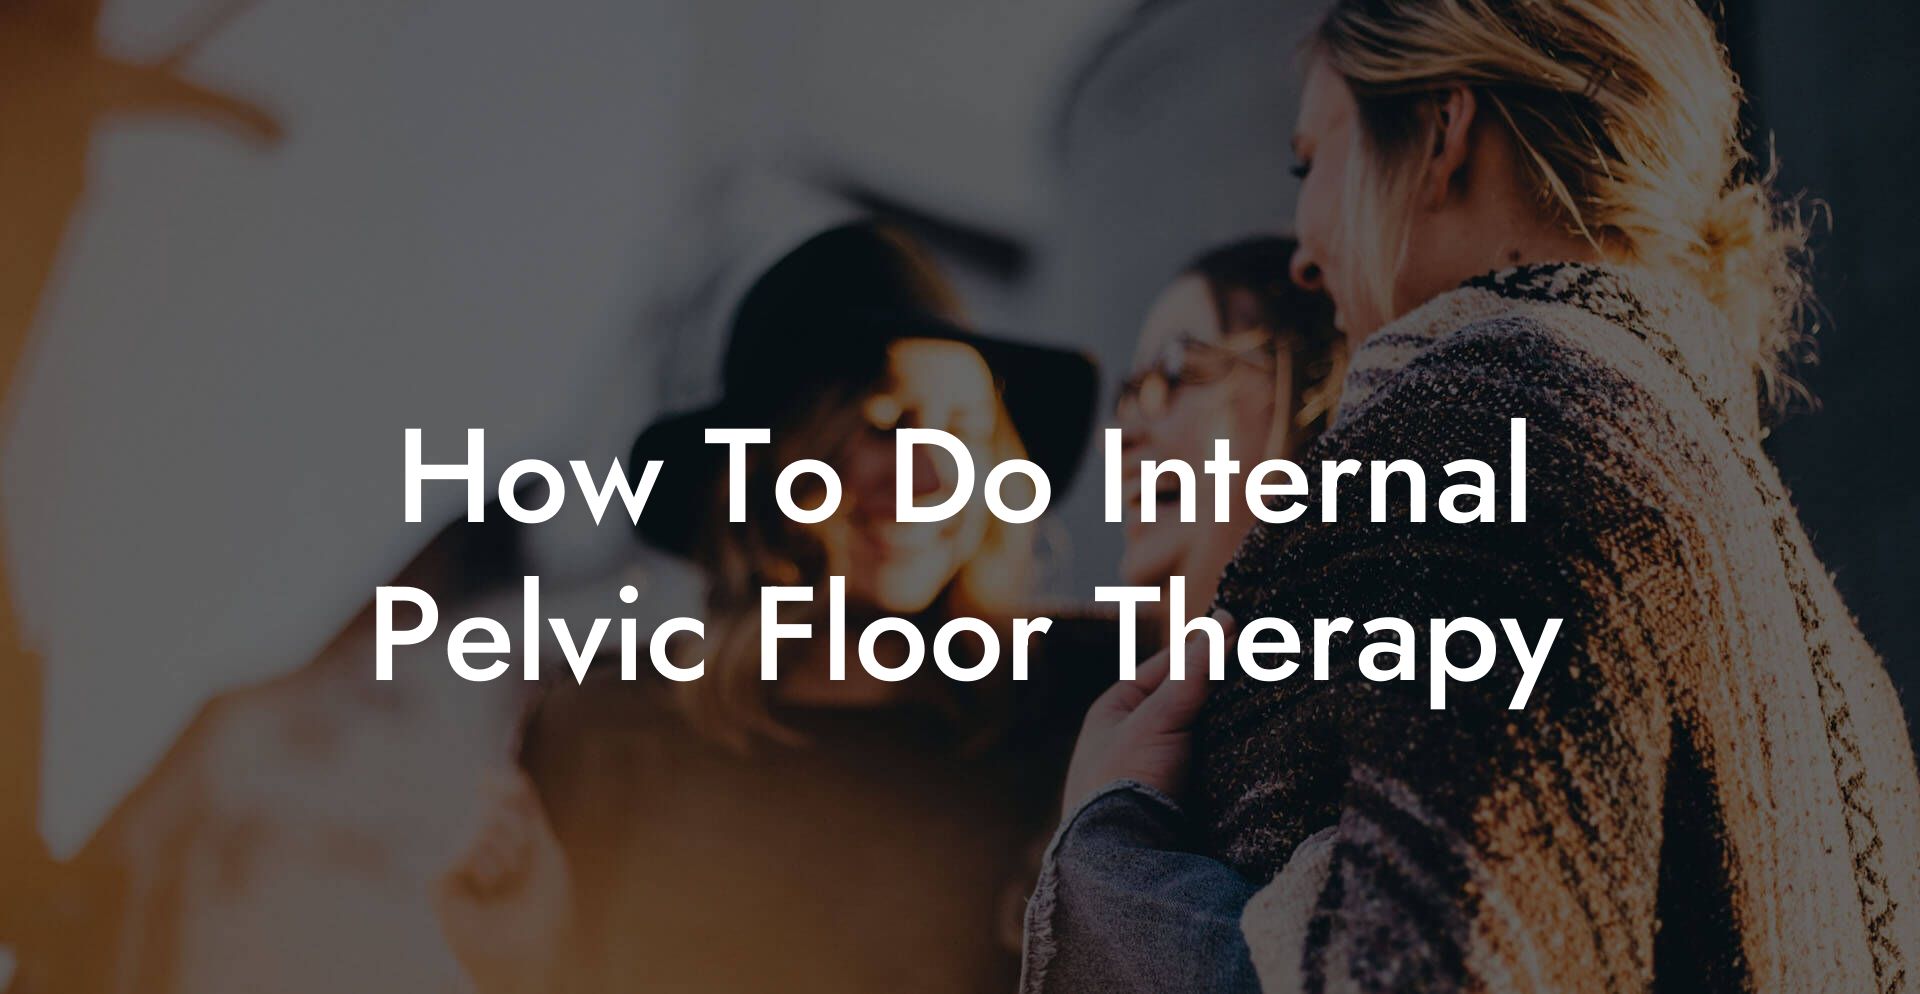 How To Do Internal Pelvic Floor Therapy